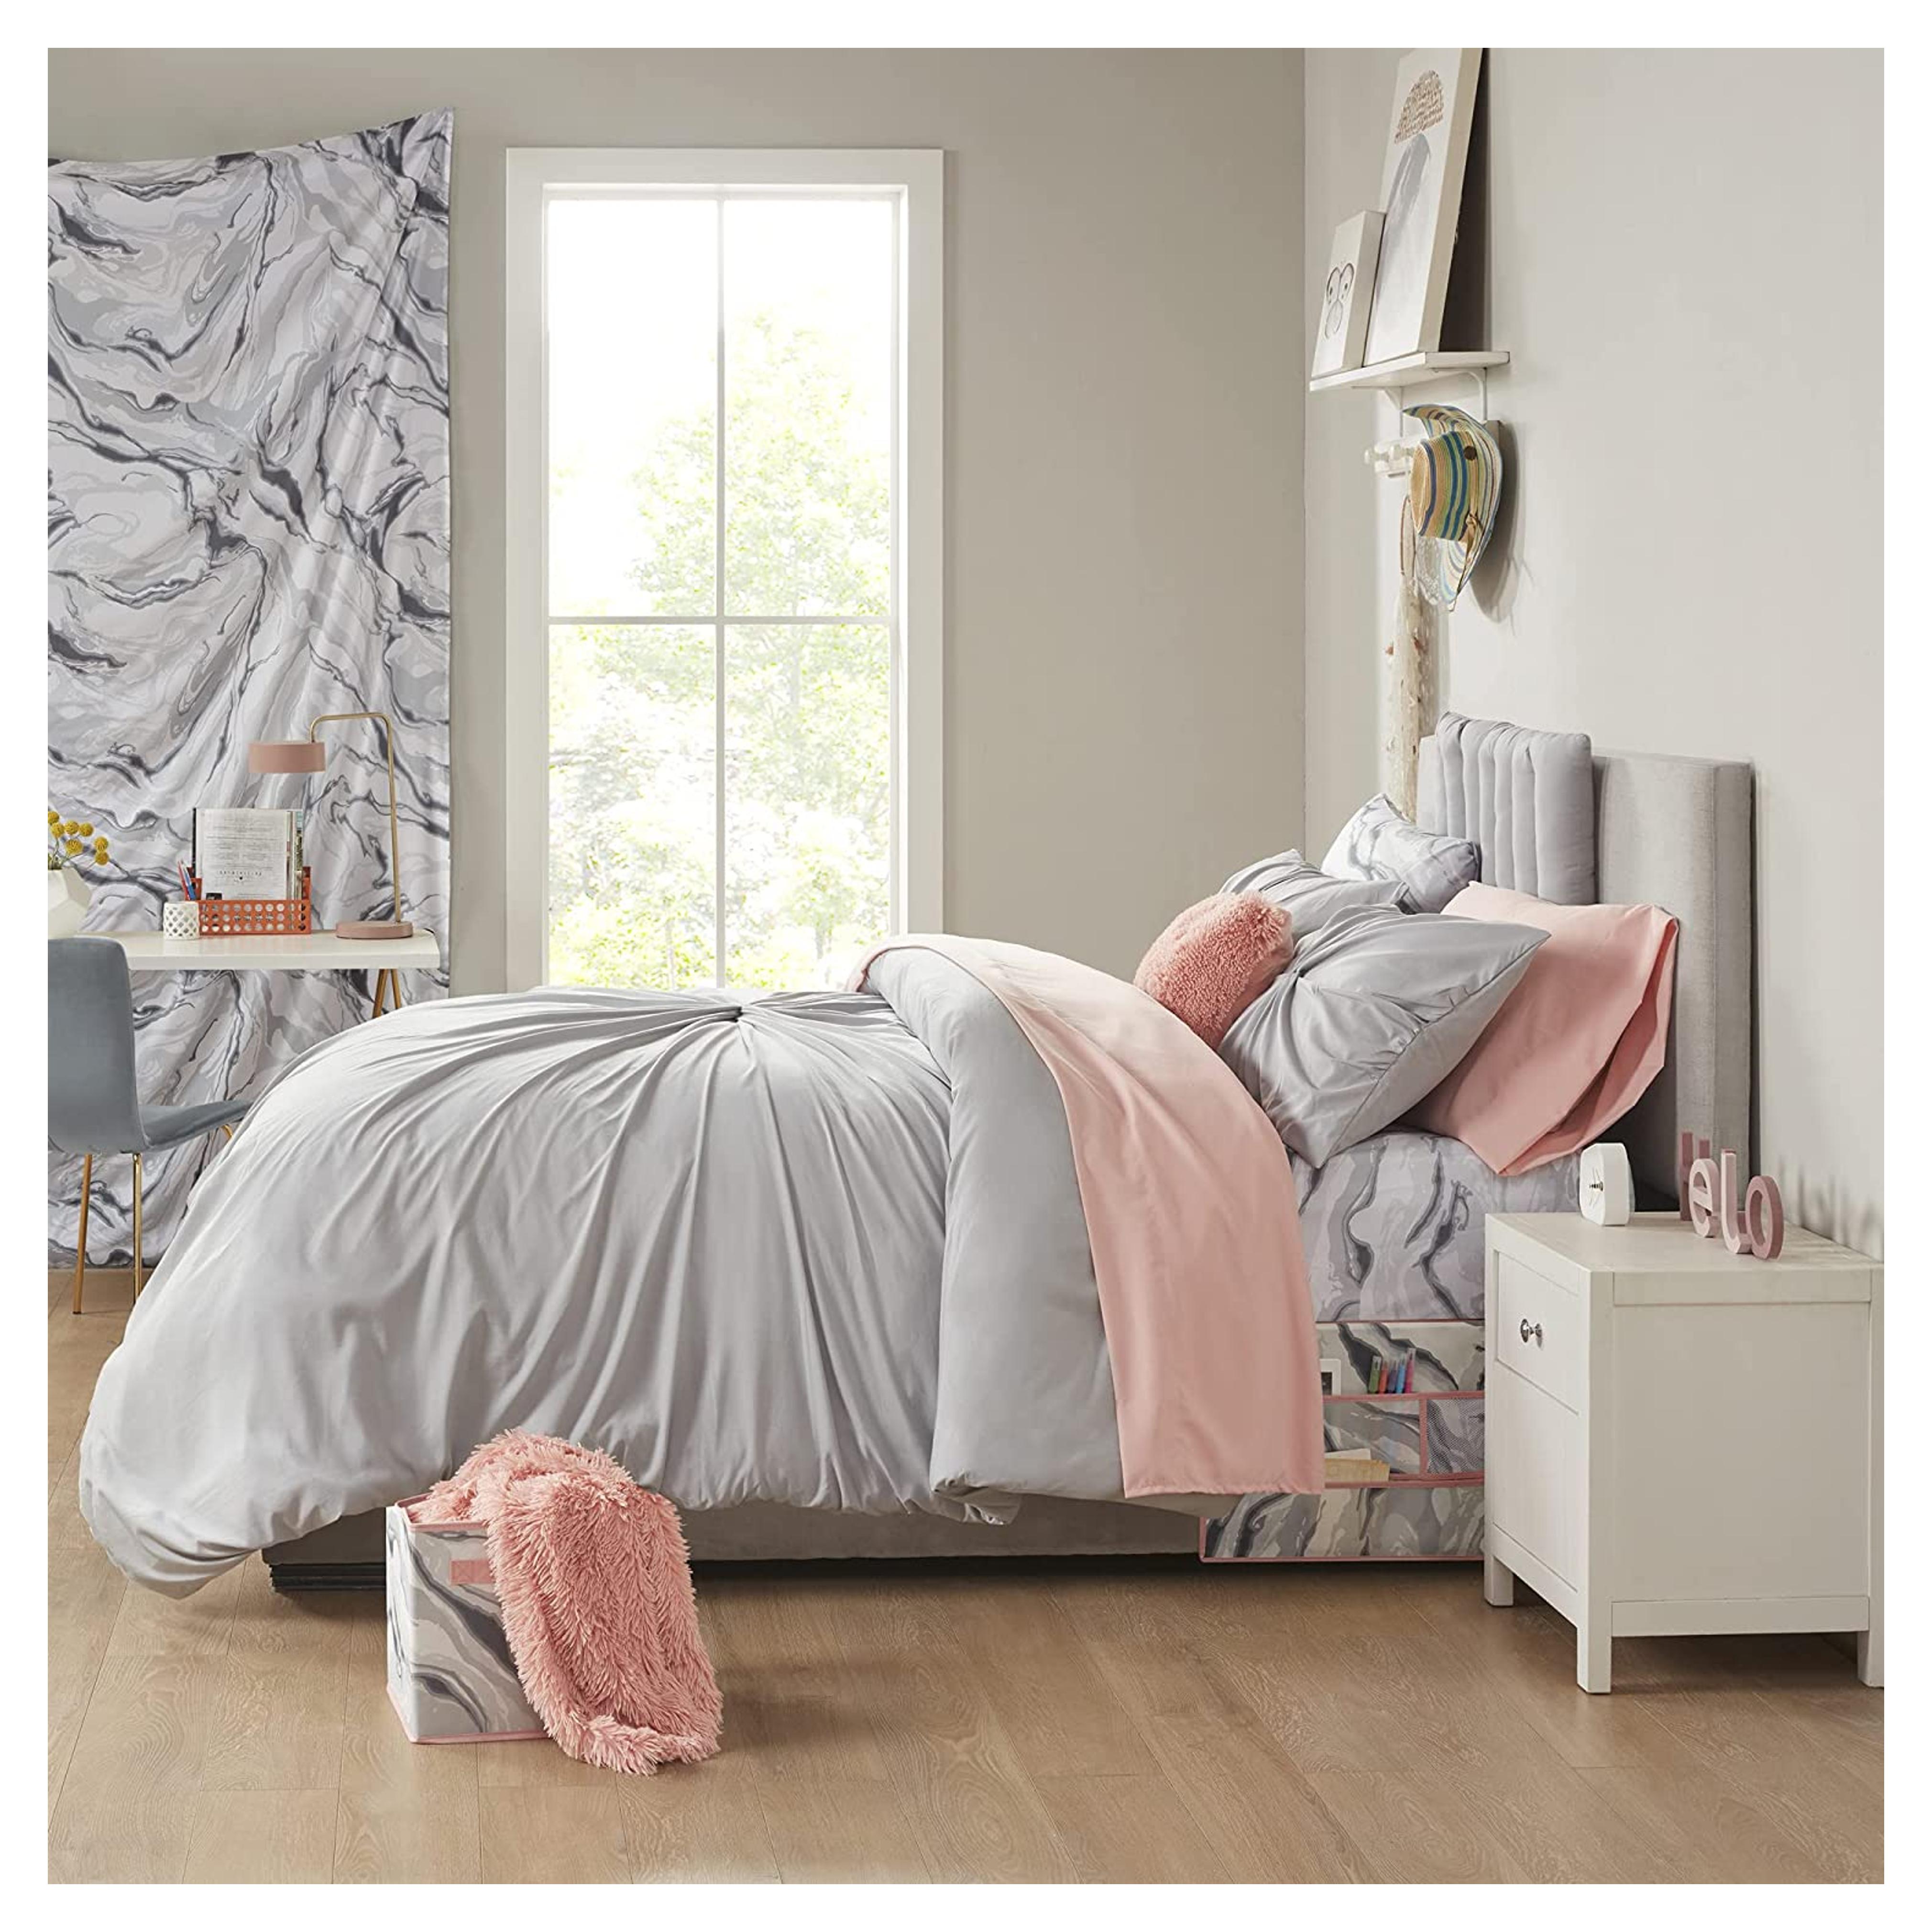 Comfort Spaces Dorm Room Comforter Set - College Essentials, Complete Dormitory Bedroom Pack And Sheet with 2 Side Pockets, Queen Madelyn, Grey 17 Piece